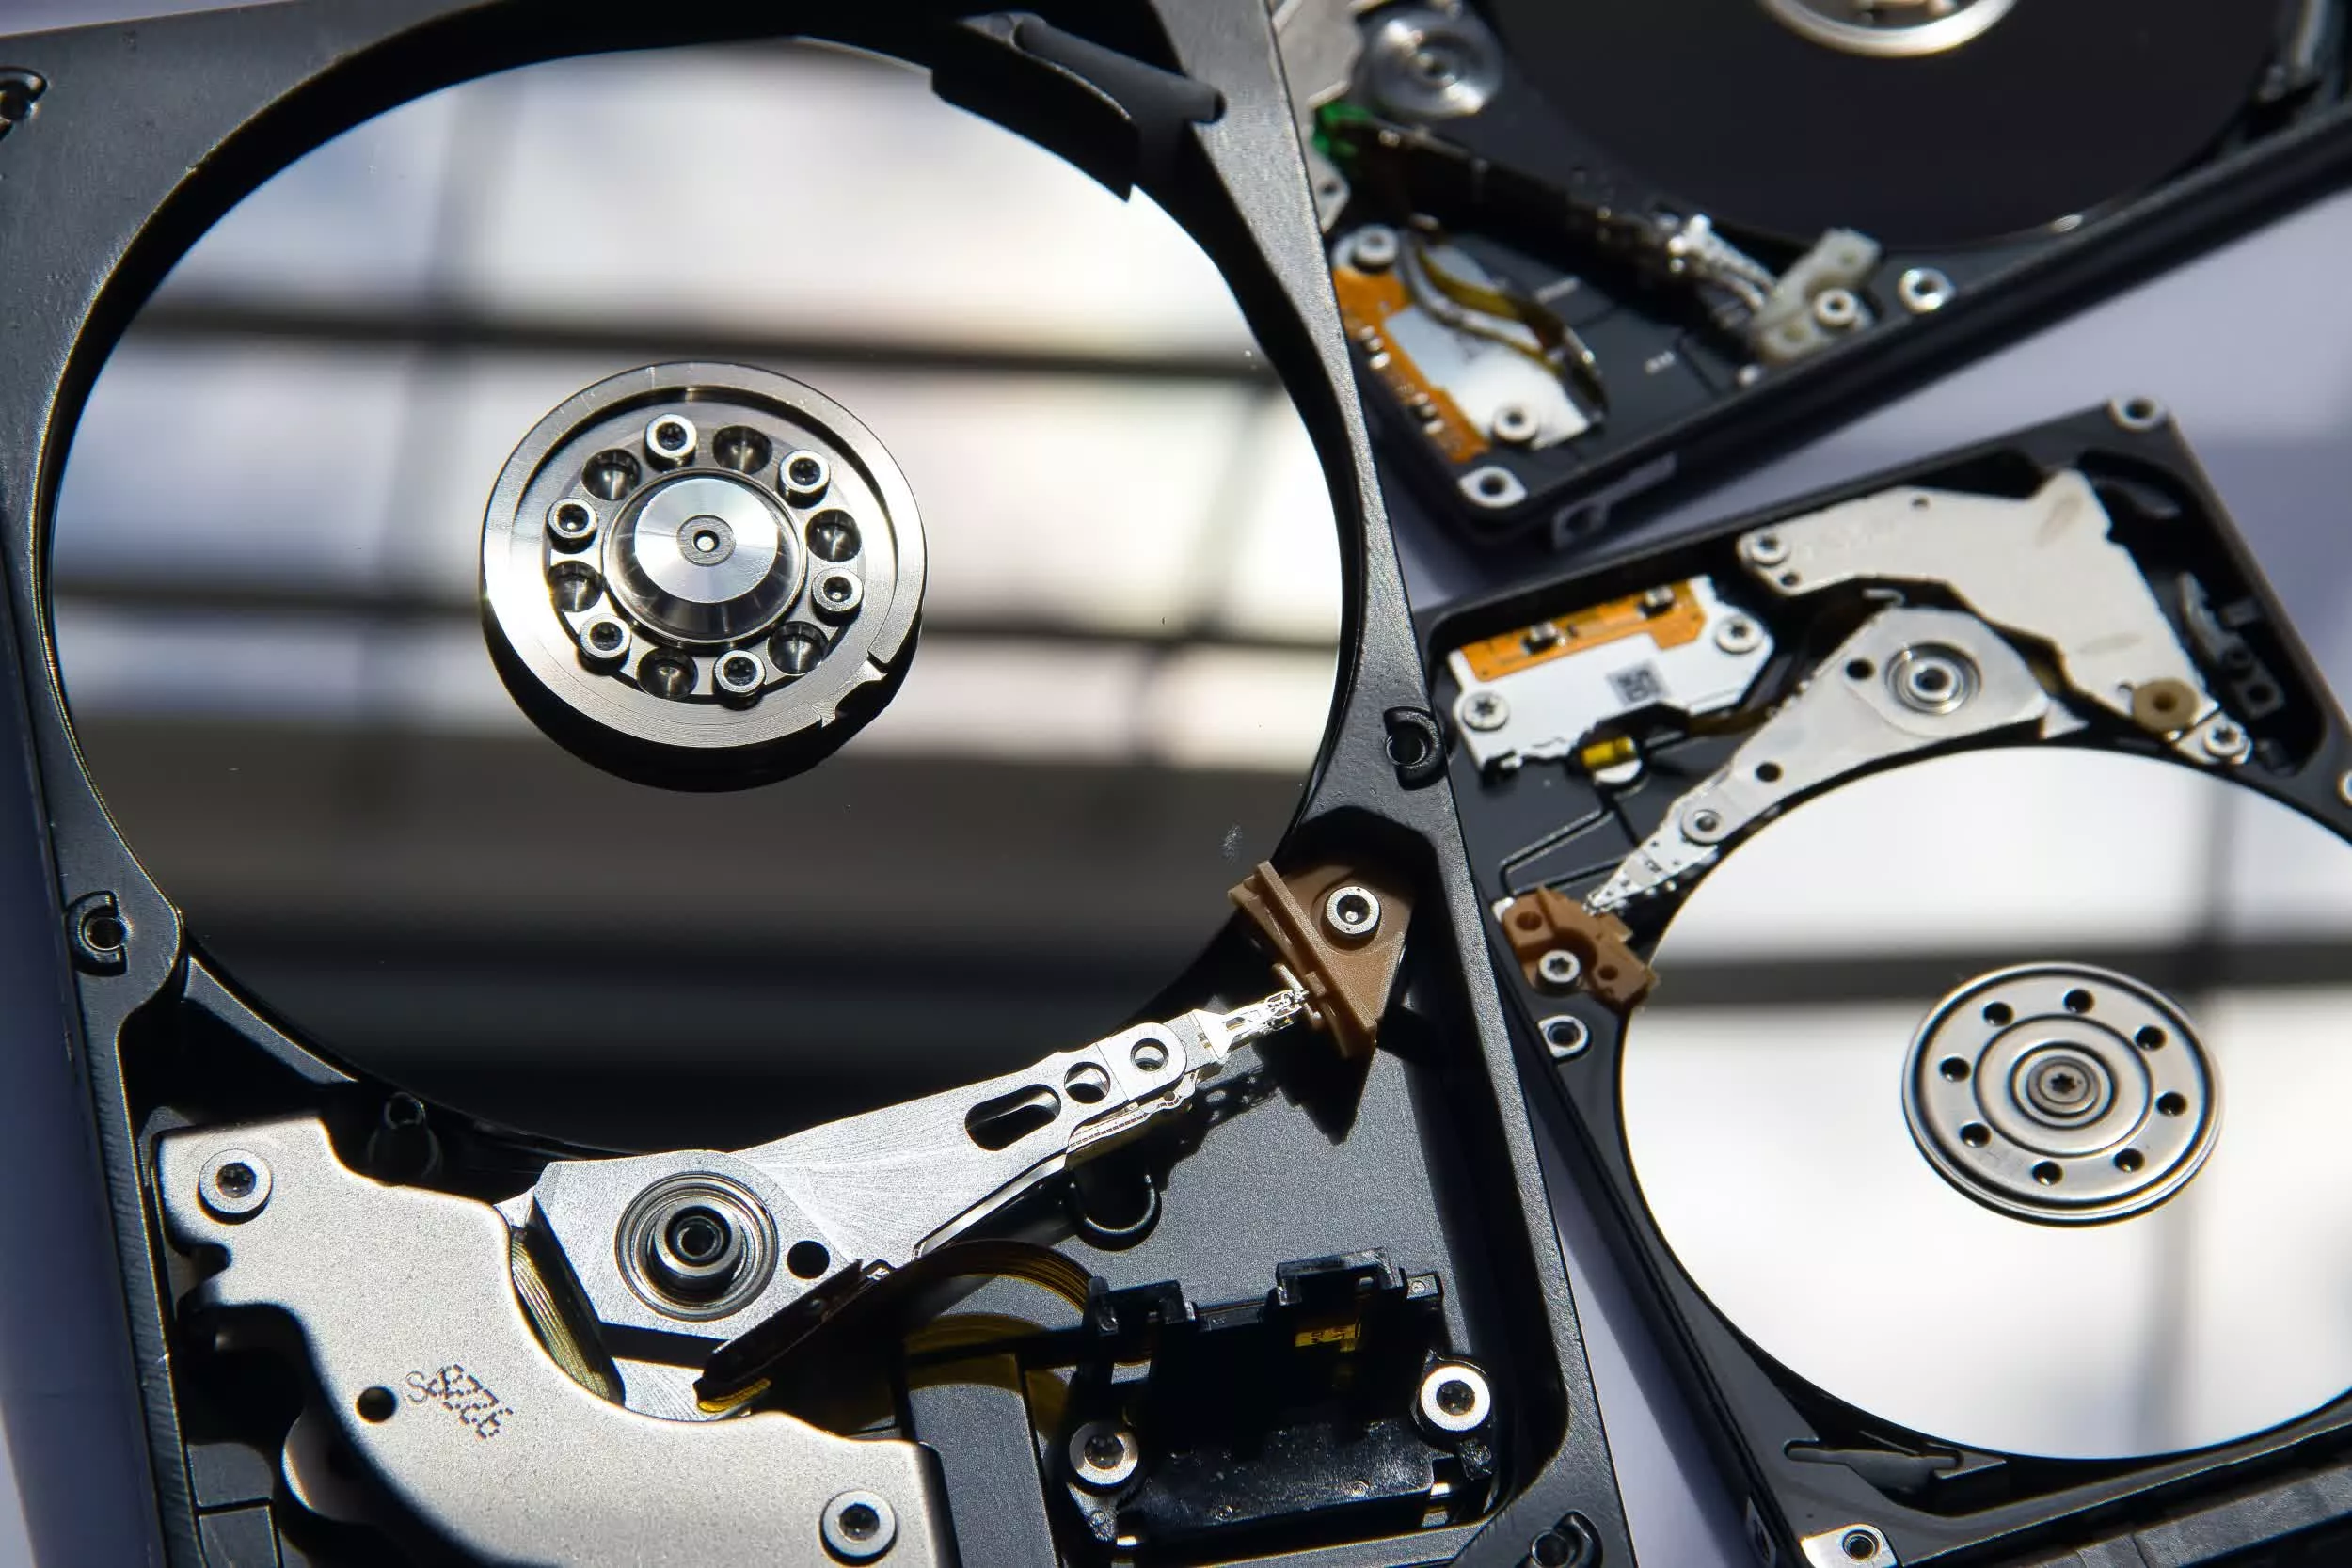 Risk management means destroying all decommissioned hard drives